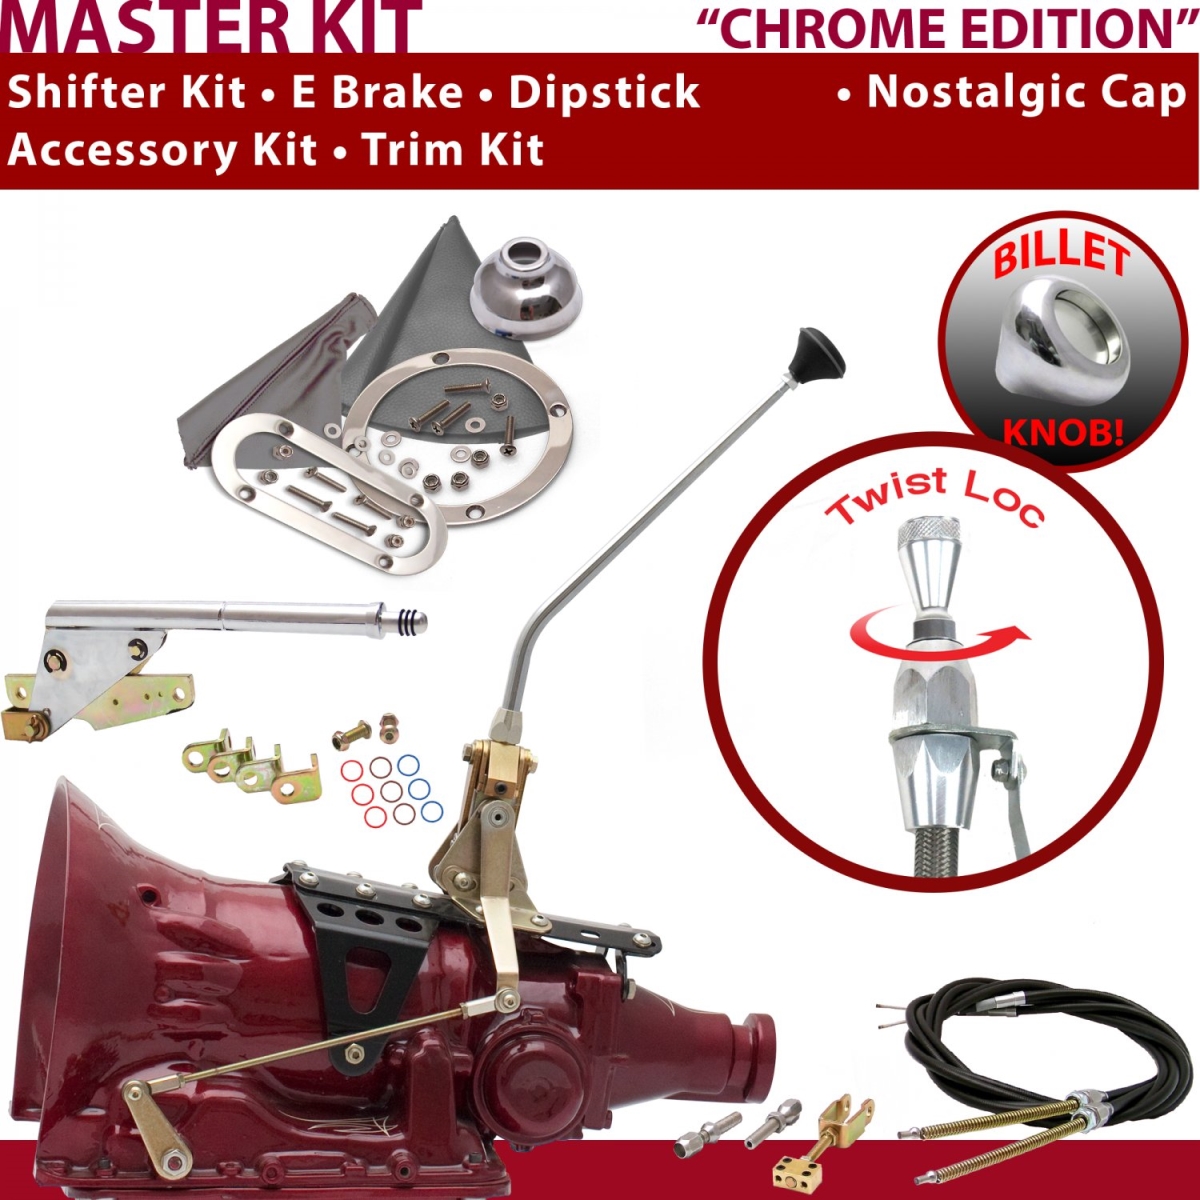 American Shifter 508025 518 Shifter Kit Chrome 12 in. E Brake Cable Trim Kit Dipstick for F0334 -  American Shifter Company